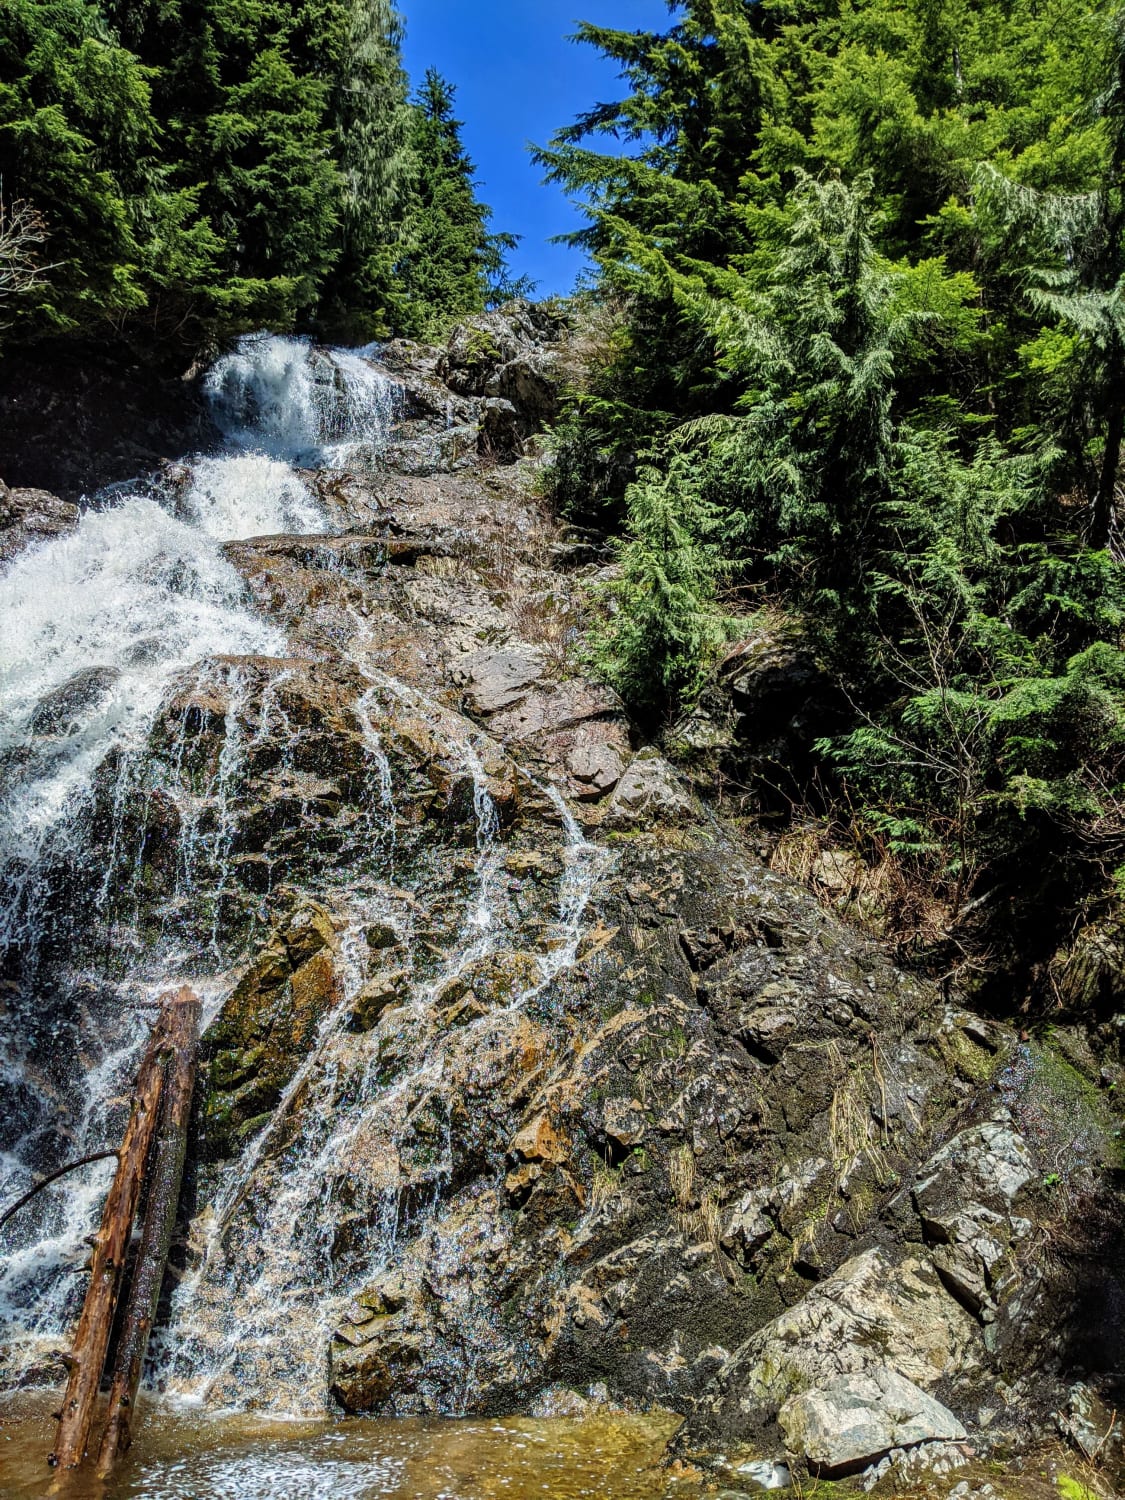 Waterfall I found on a hike today, and then climbed up to the top! Near Grouse Mountain, North Vancouver, BC, Canada.